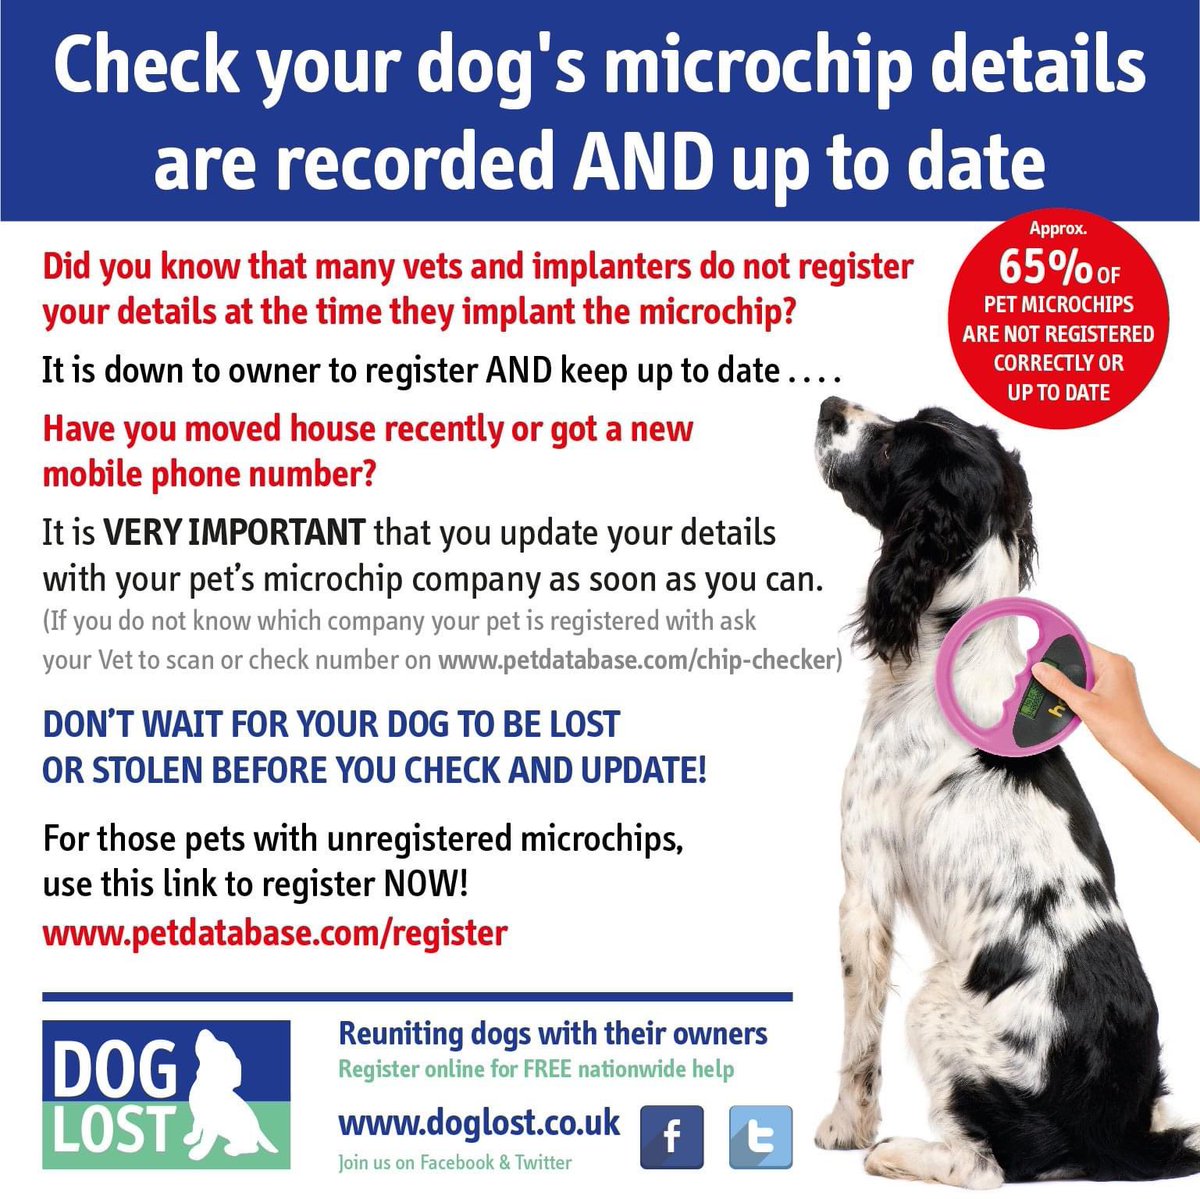 @MailOnline @VetsGetScanning The microchip databases have been letting their customers down for years and this isn’t the first time this has happened! #AnimalCompanionship#MakeChipsCount #FernsLaw #VetsGetScanning #ScanMe #PetTheftReform #PetAbduction